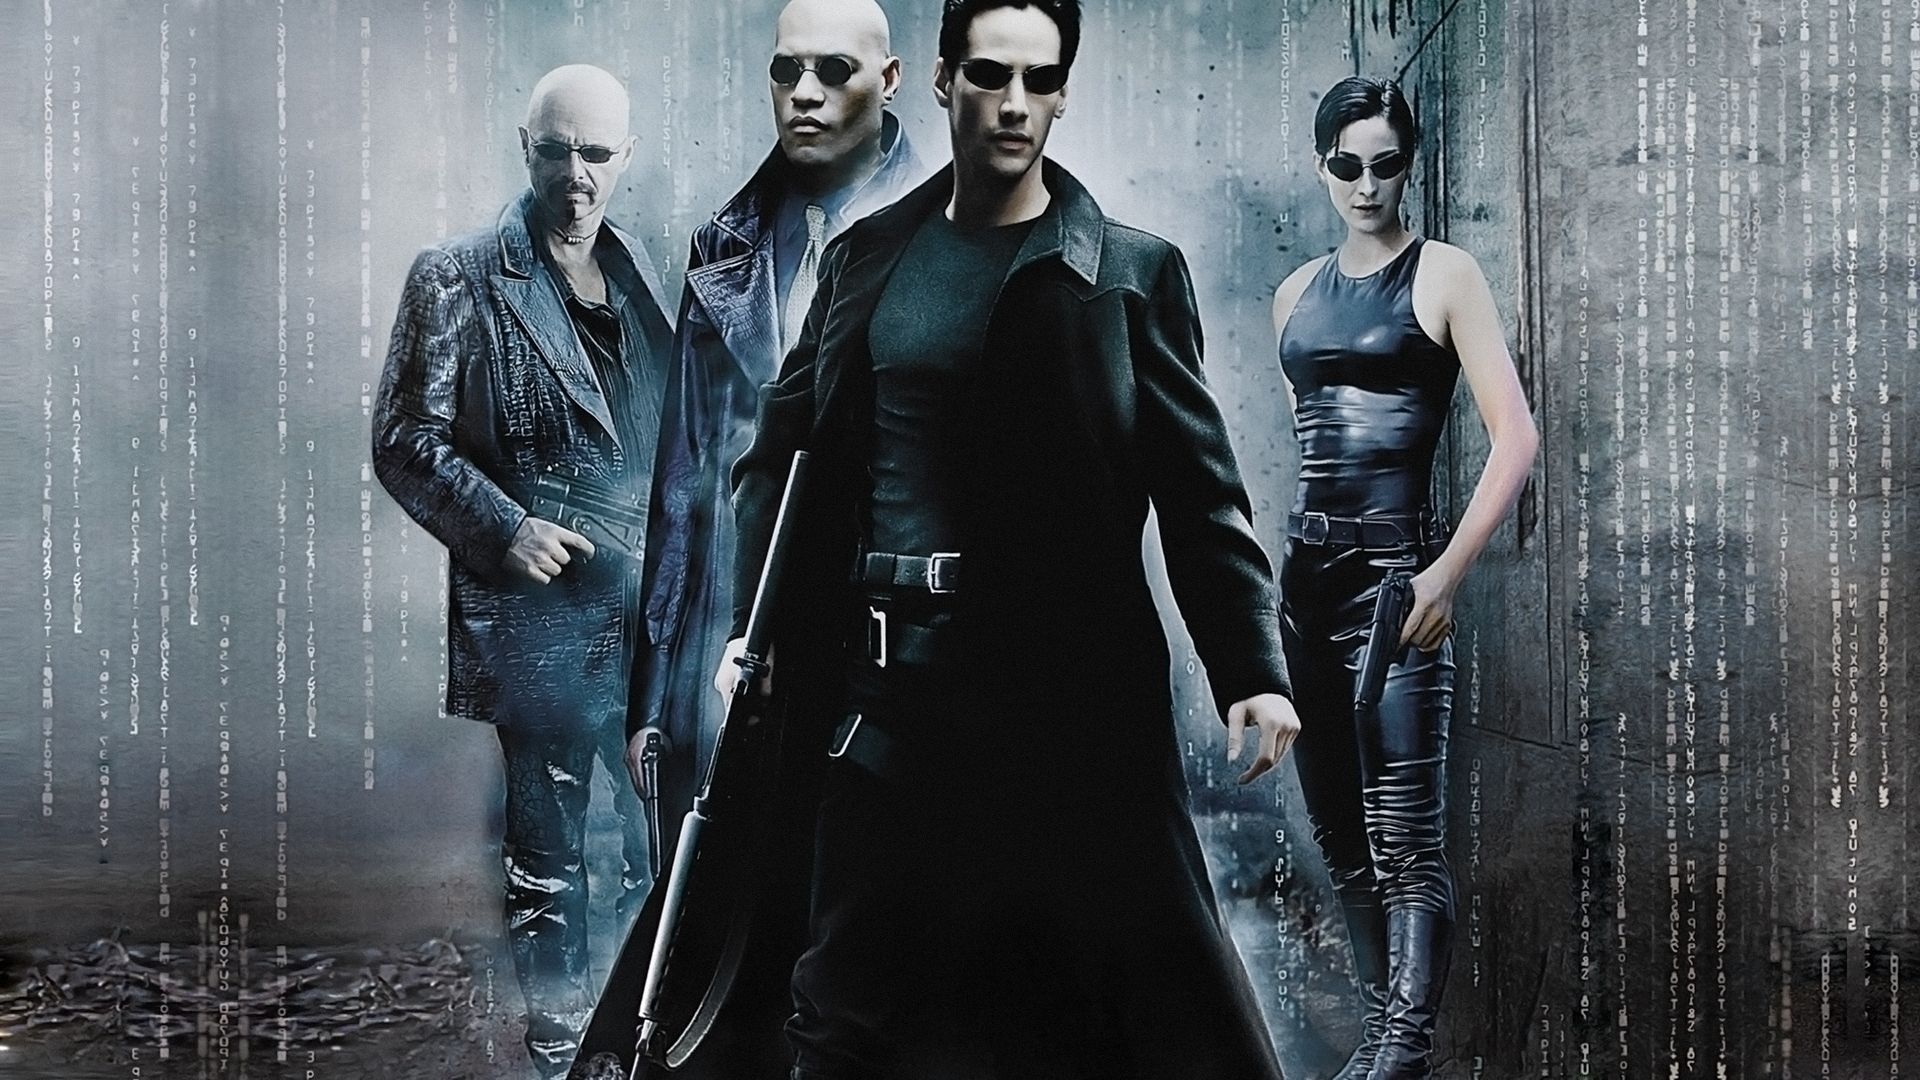 Keanu Reeves, Carrie-Anne Moss, Laurence Fishburne, and Joe Pantoliano in The Matrix